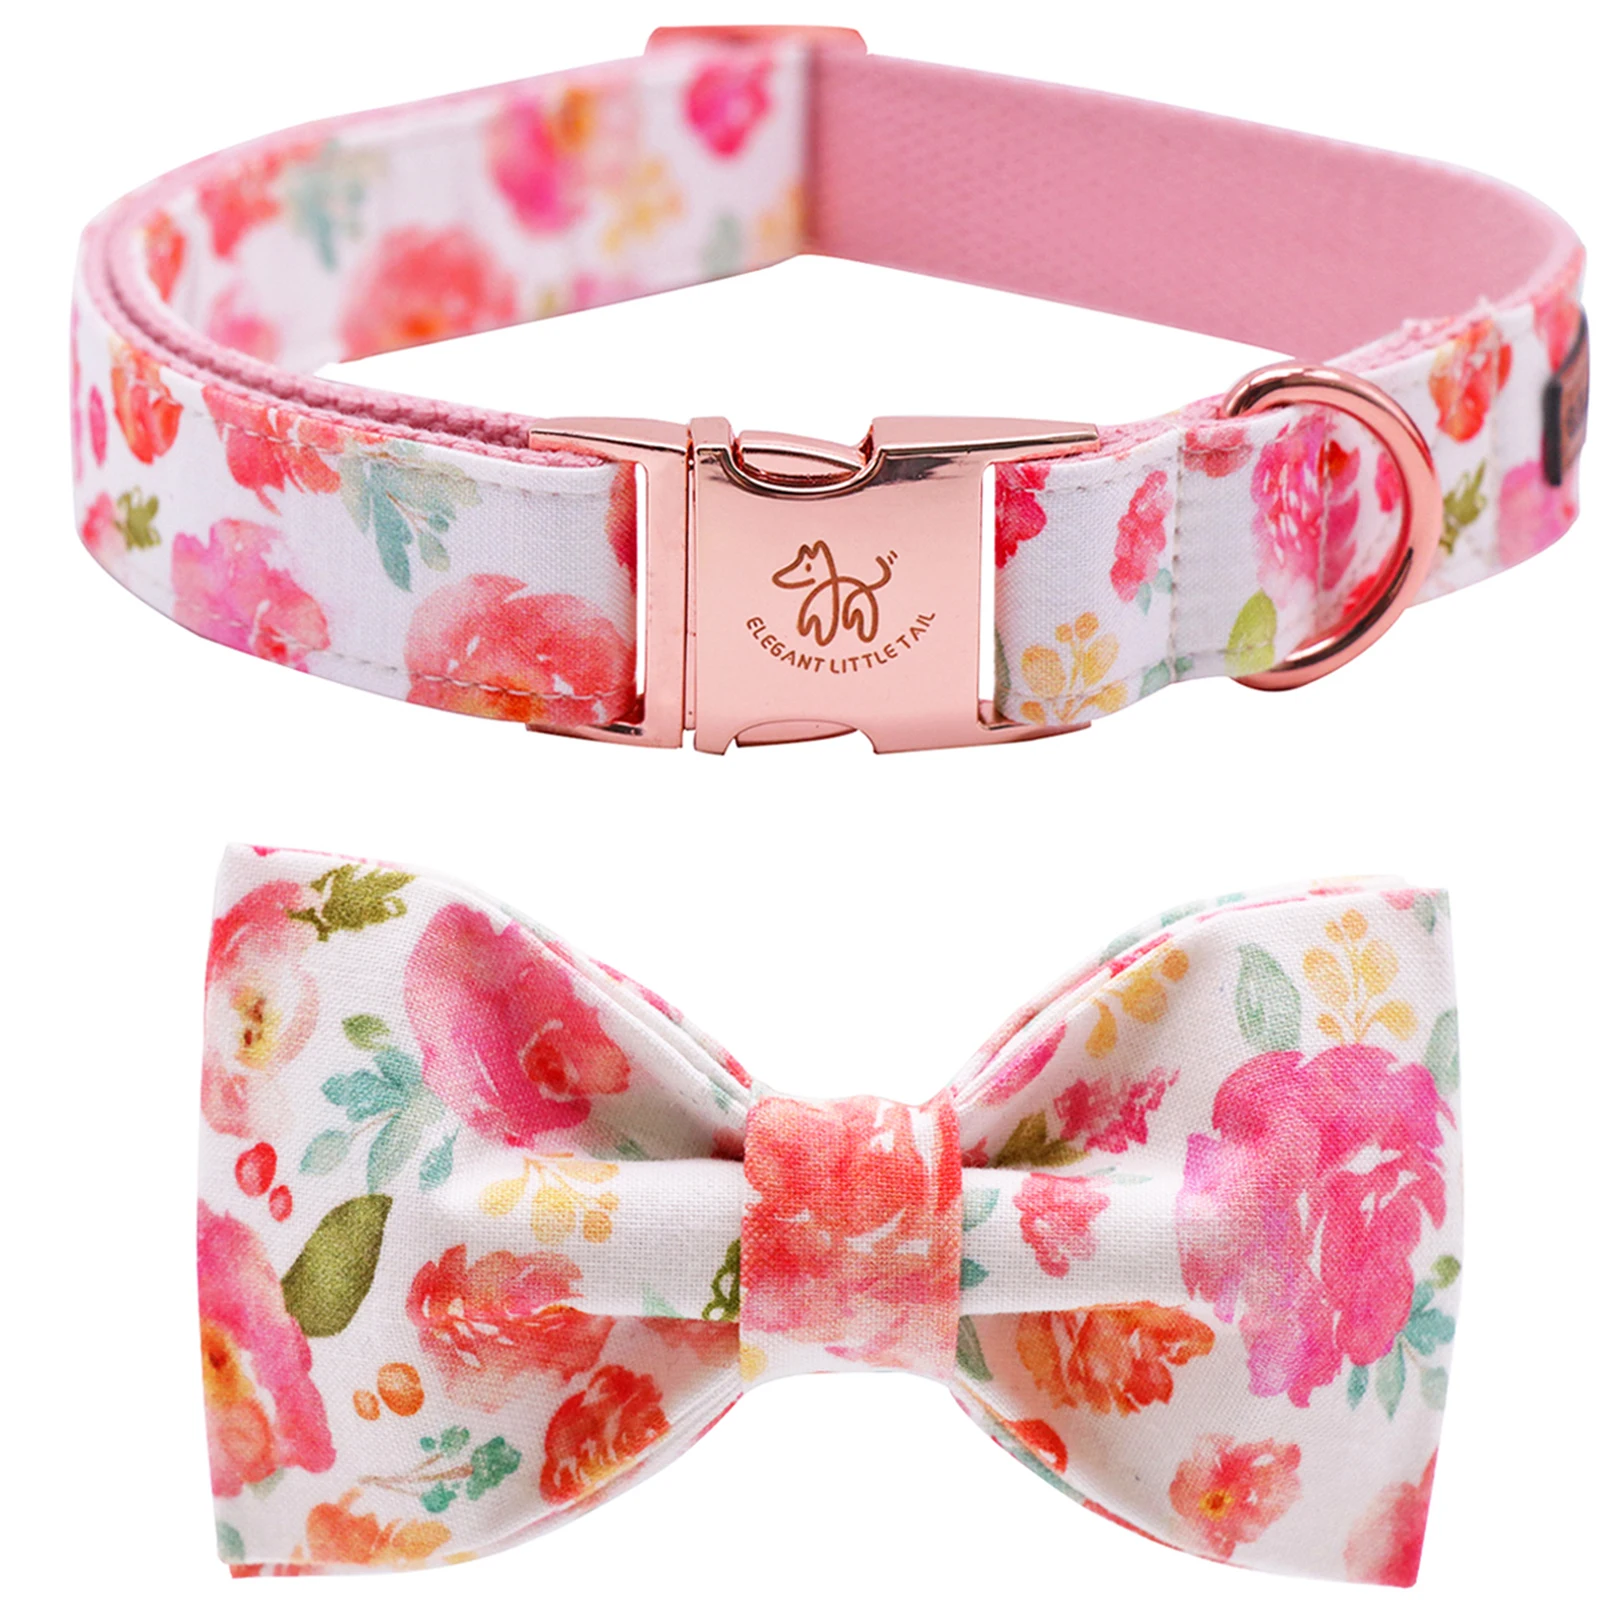 Elegant little tail Dog Collar with Bow Cotton Webbing Bowtie Dog Collar Adjustable Dog Collars for Small Medium Large Dogs